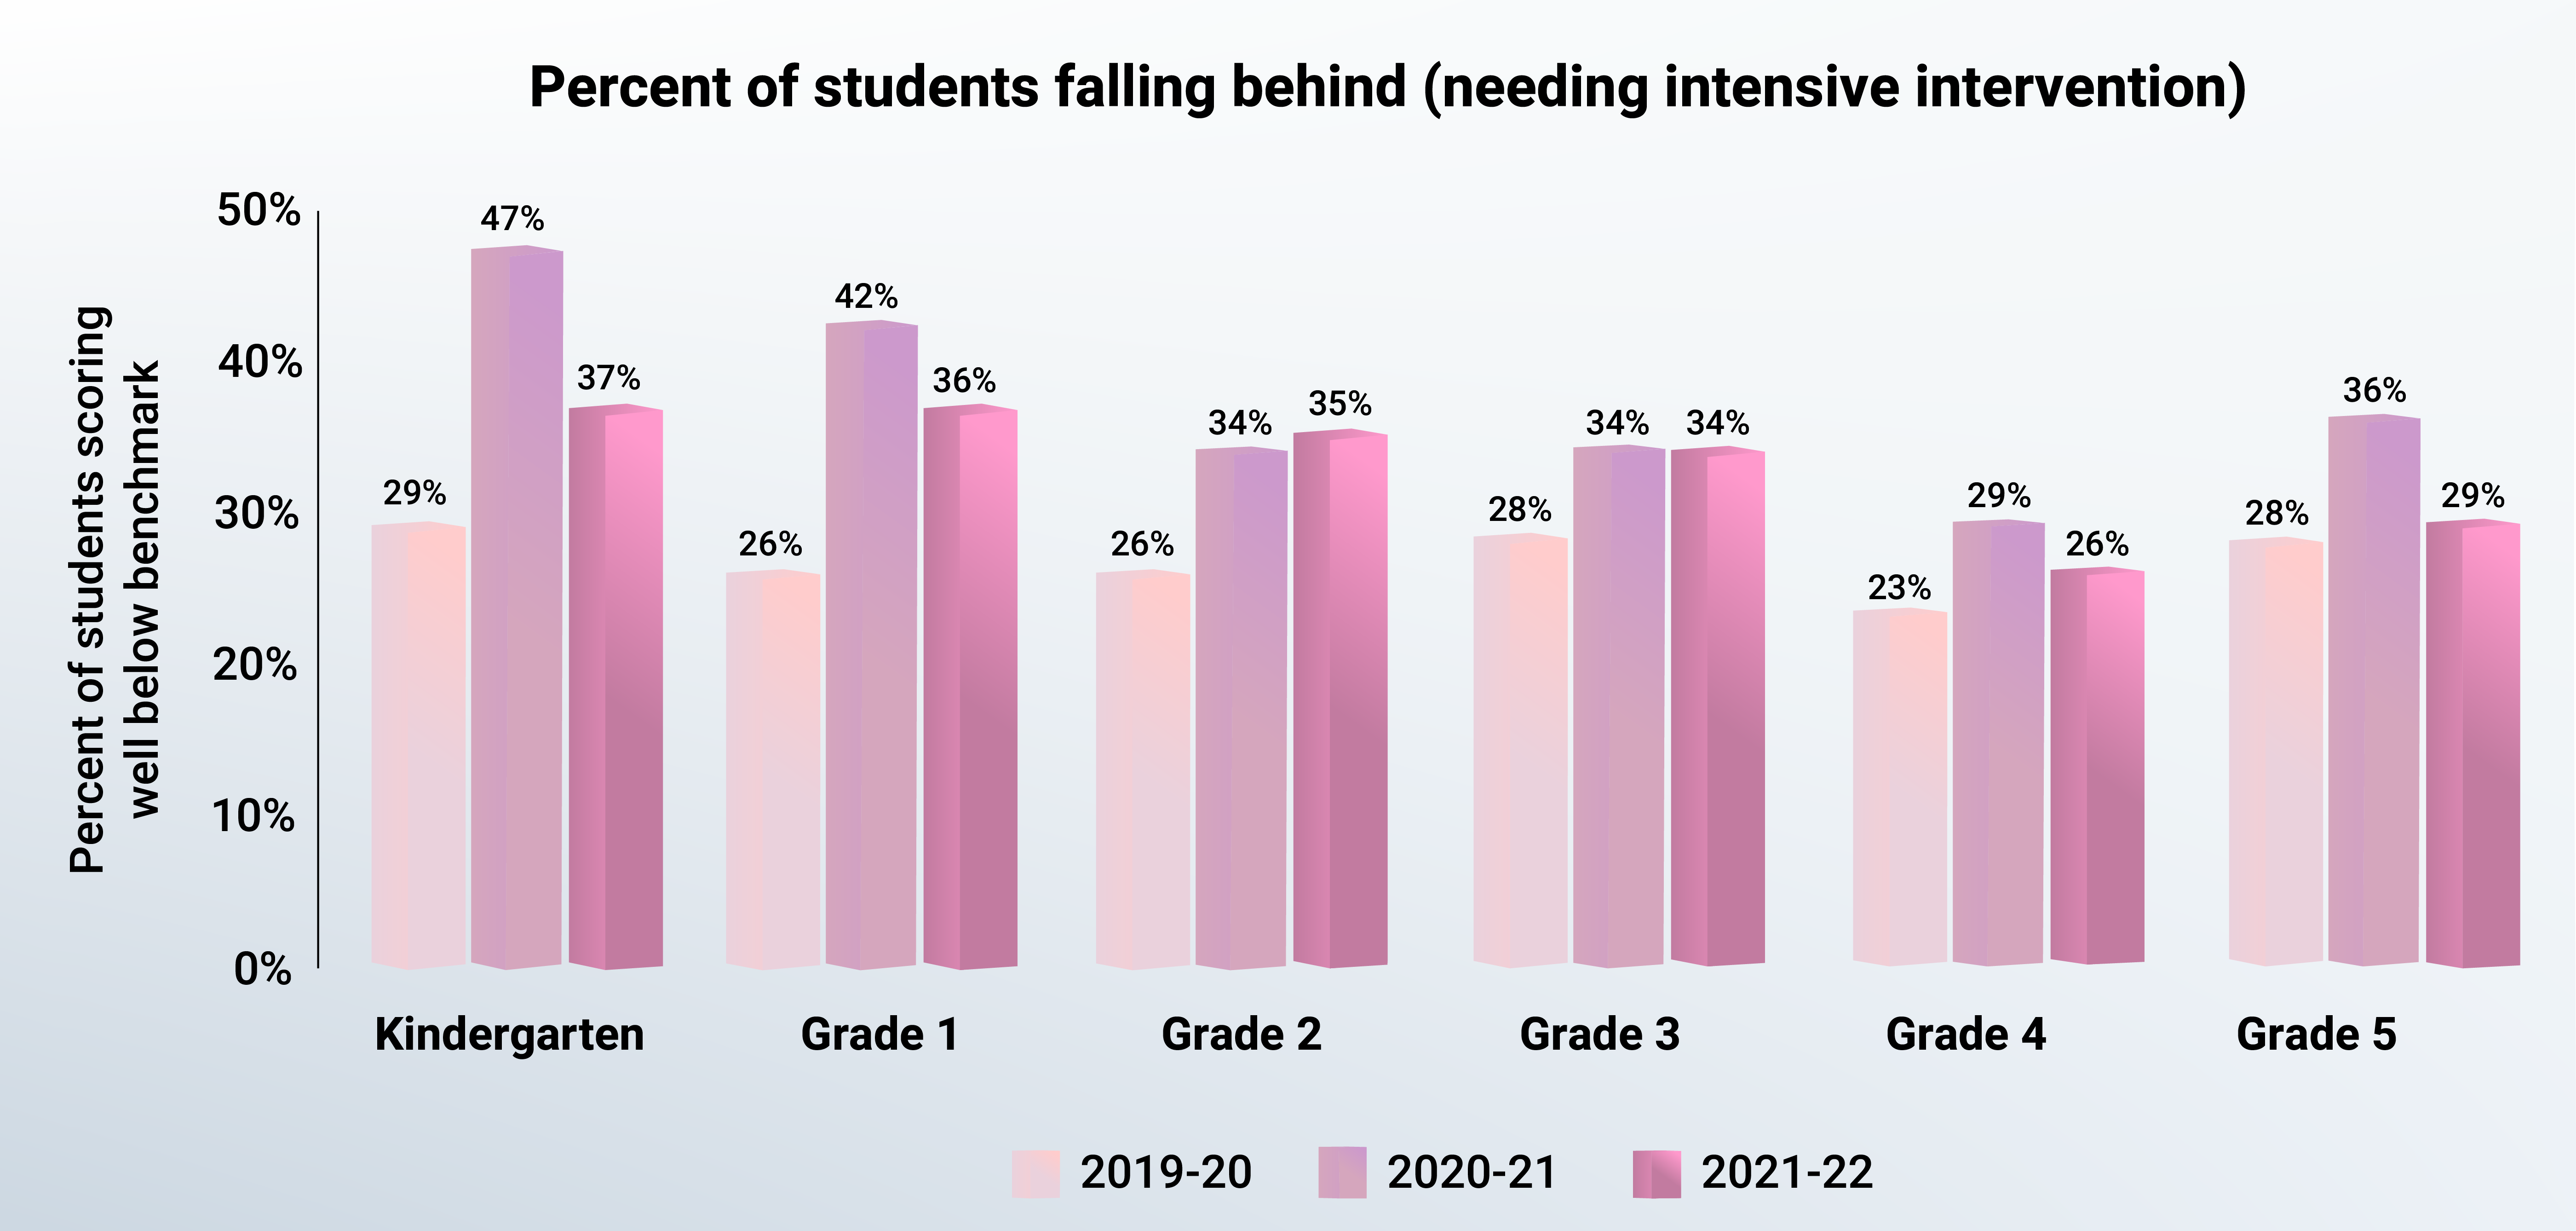 Percent of students falling behind